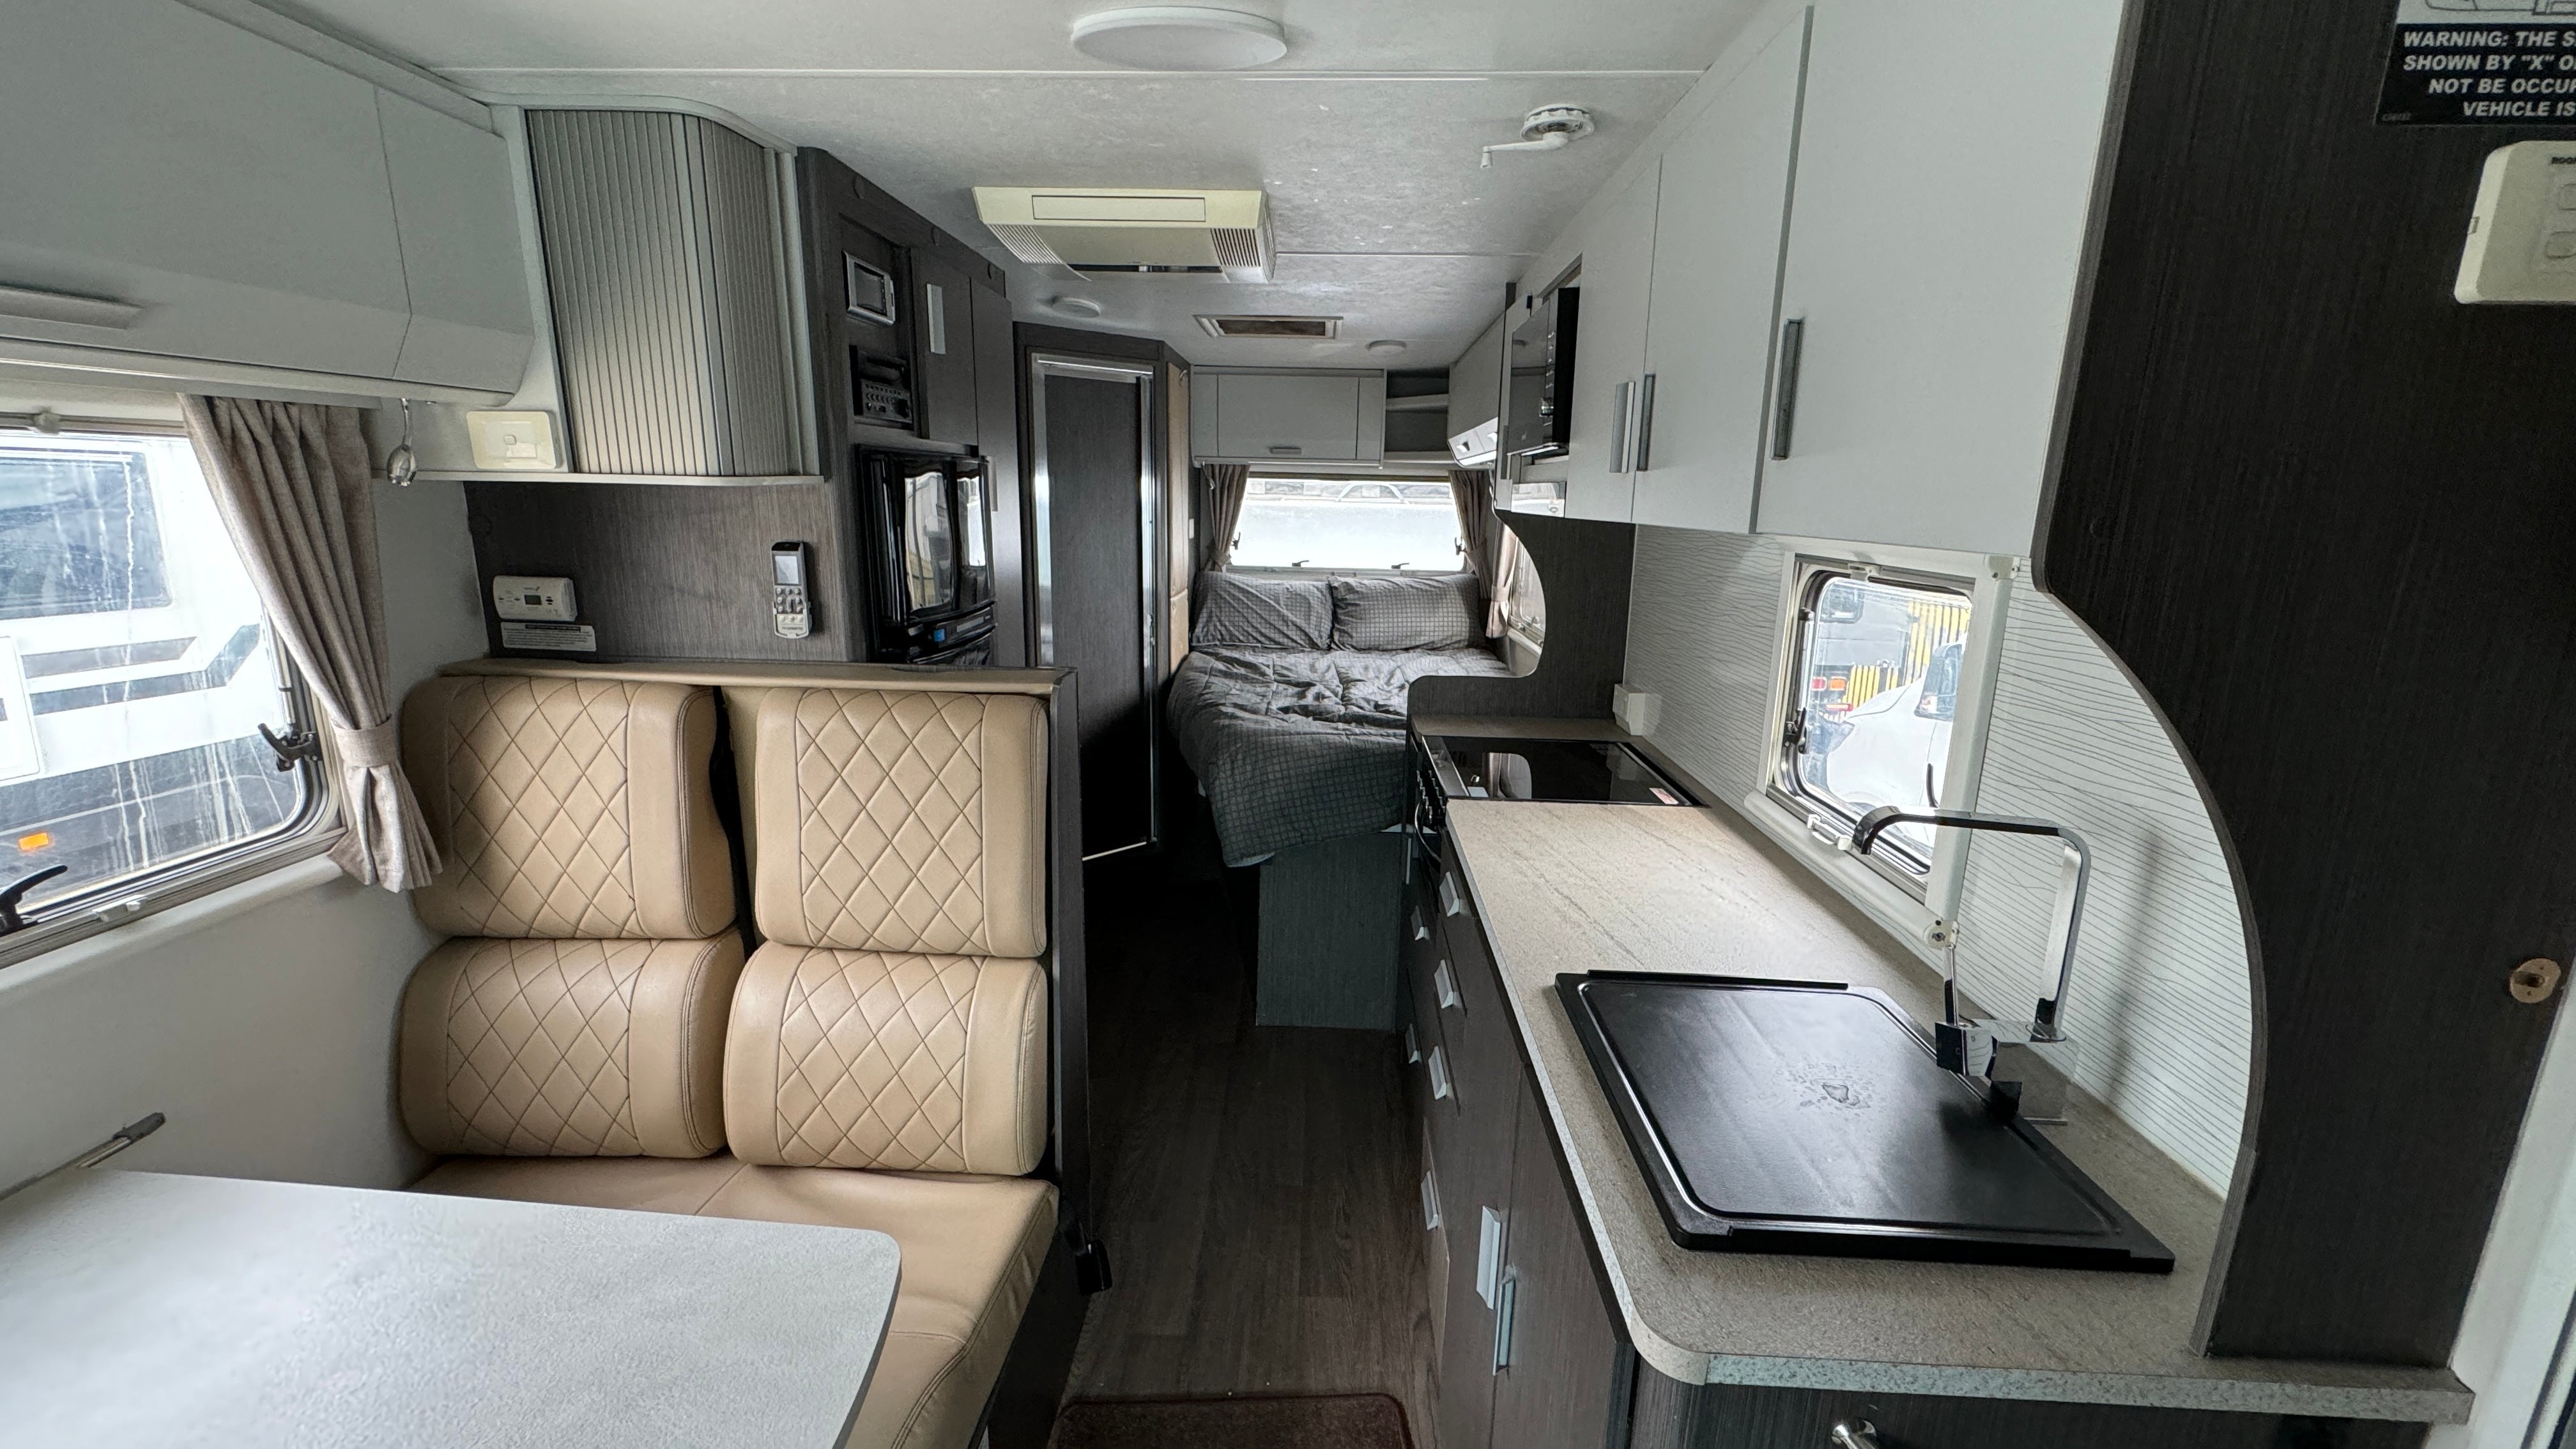 JAYCO CONQUEST